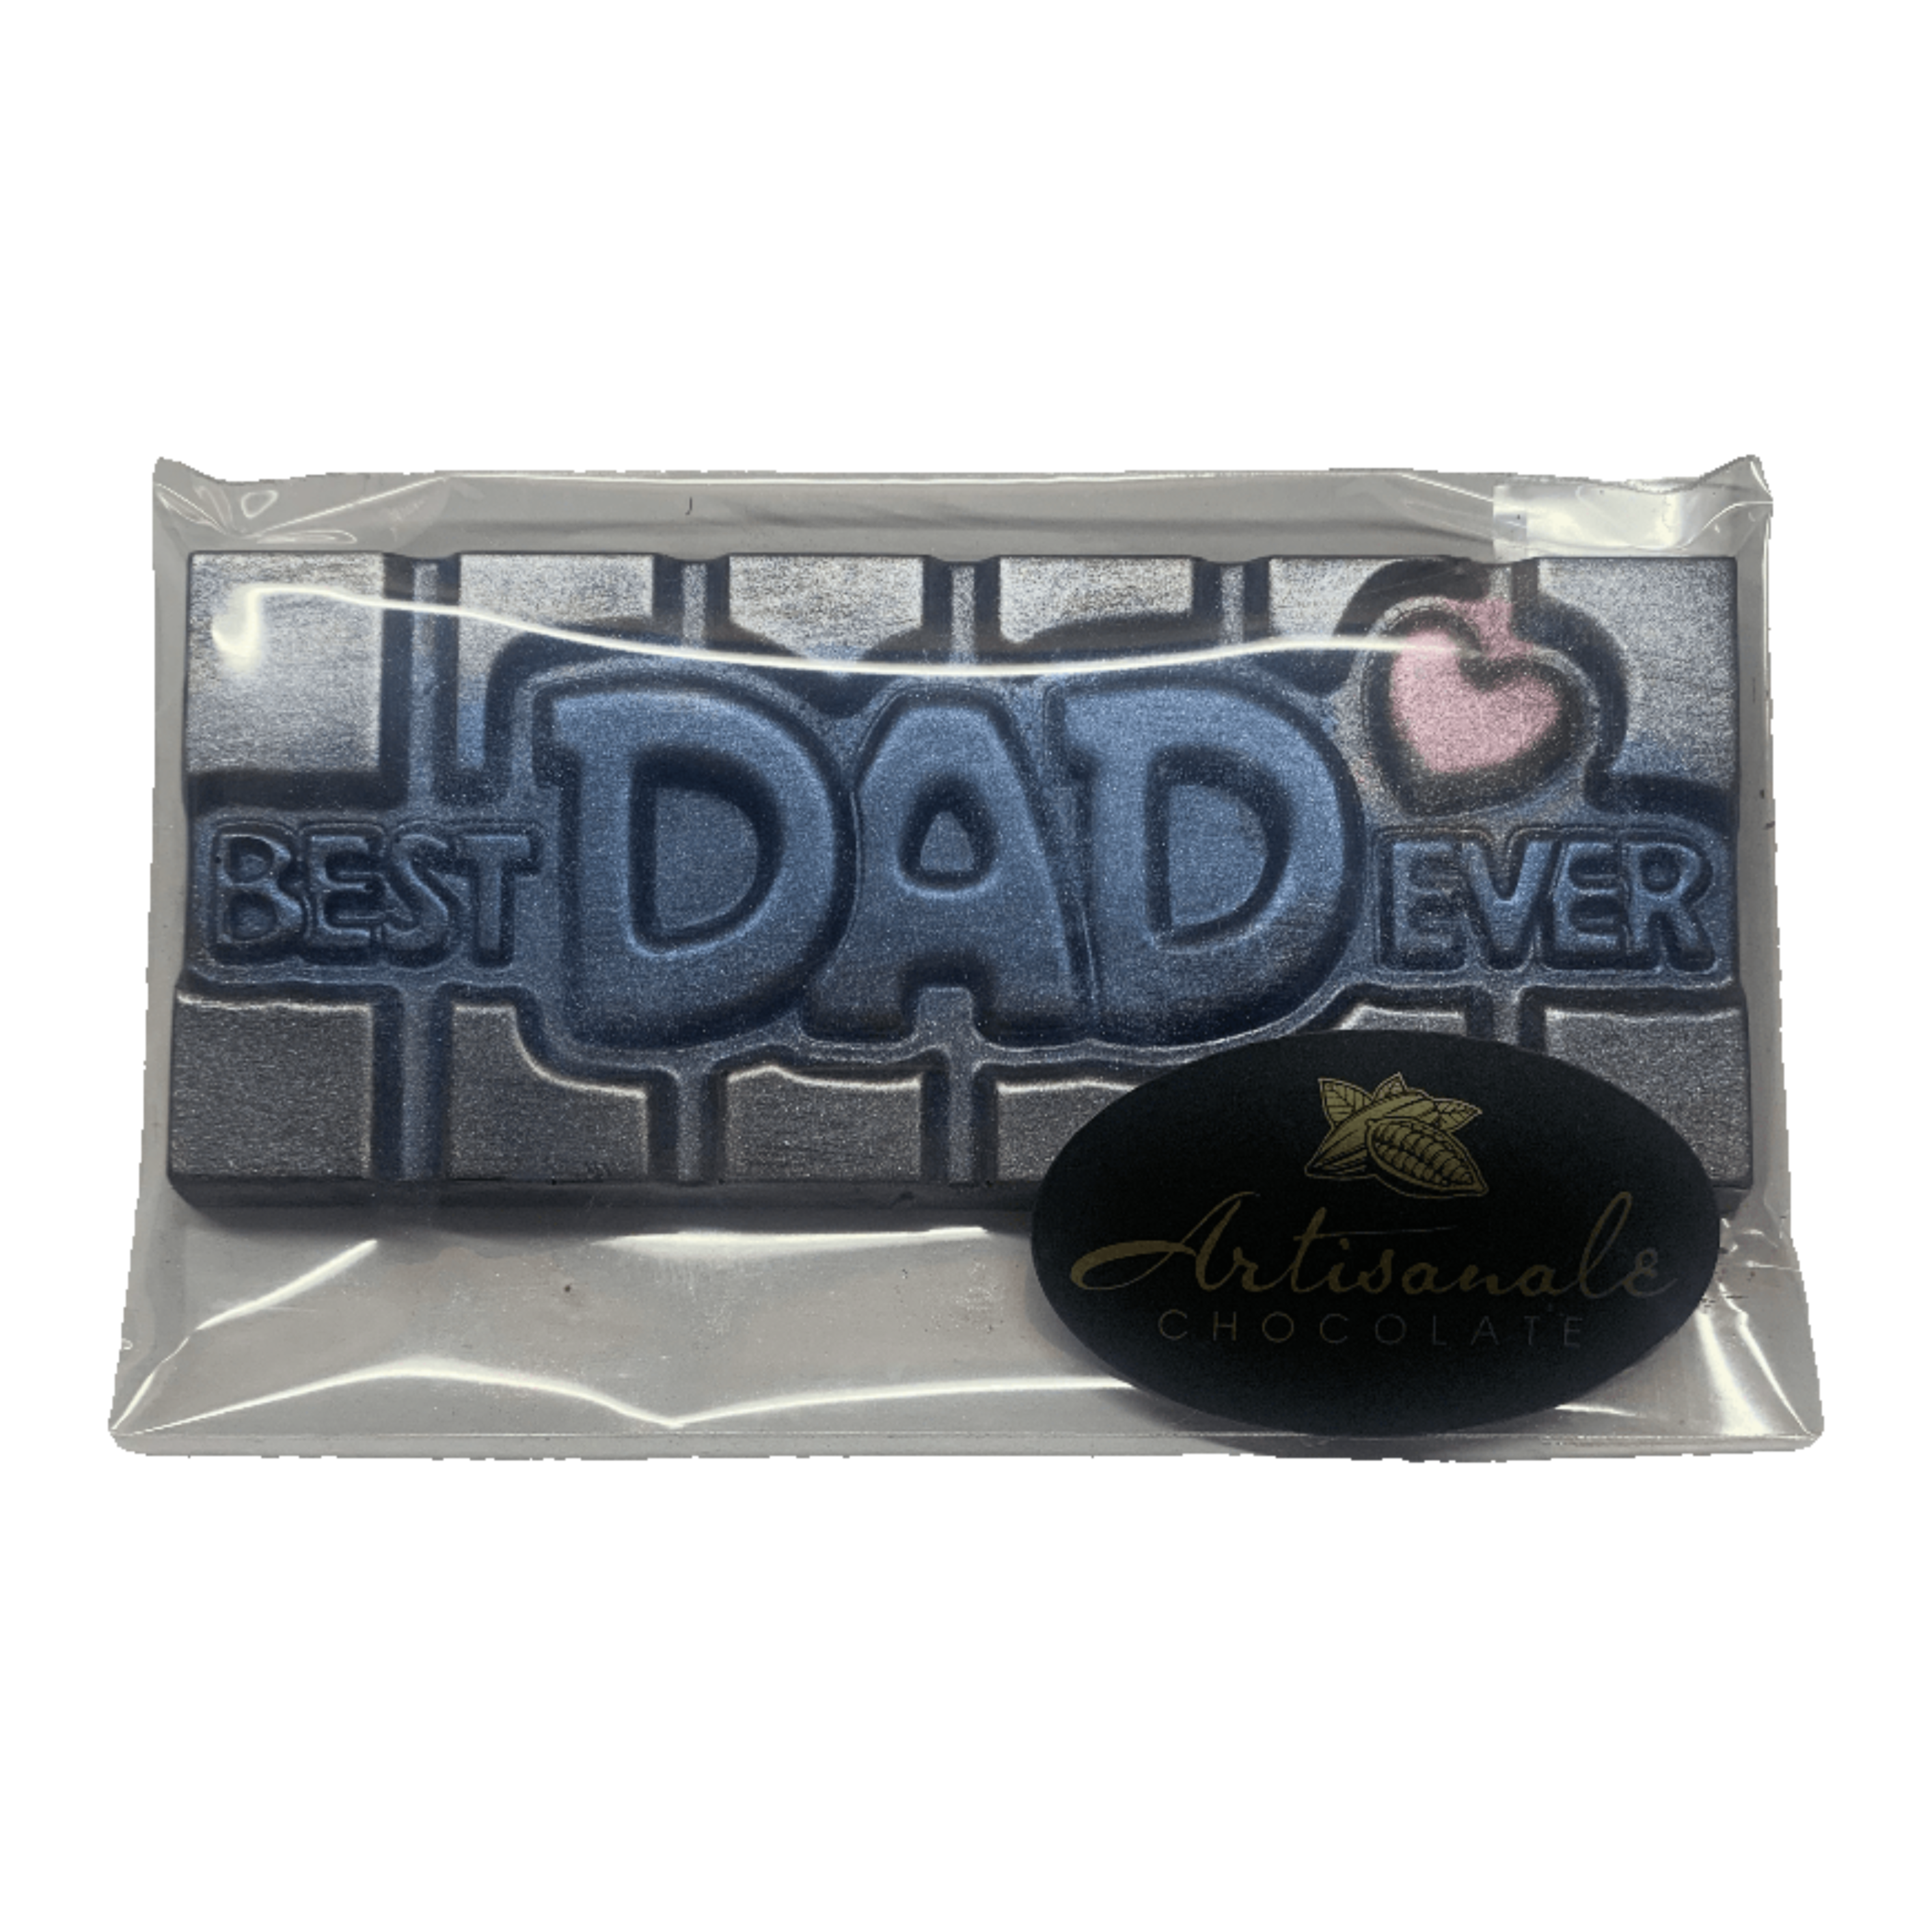 Say_Best_Dad_Ever_Wrapped-min_27a80d07-0464-45fa-bfed-bb8a5af389ae.png